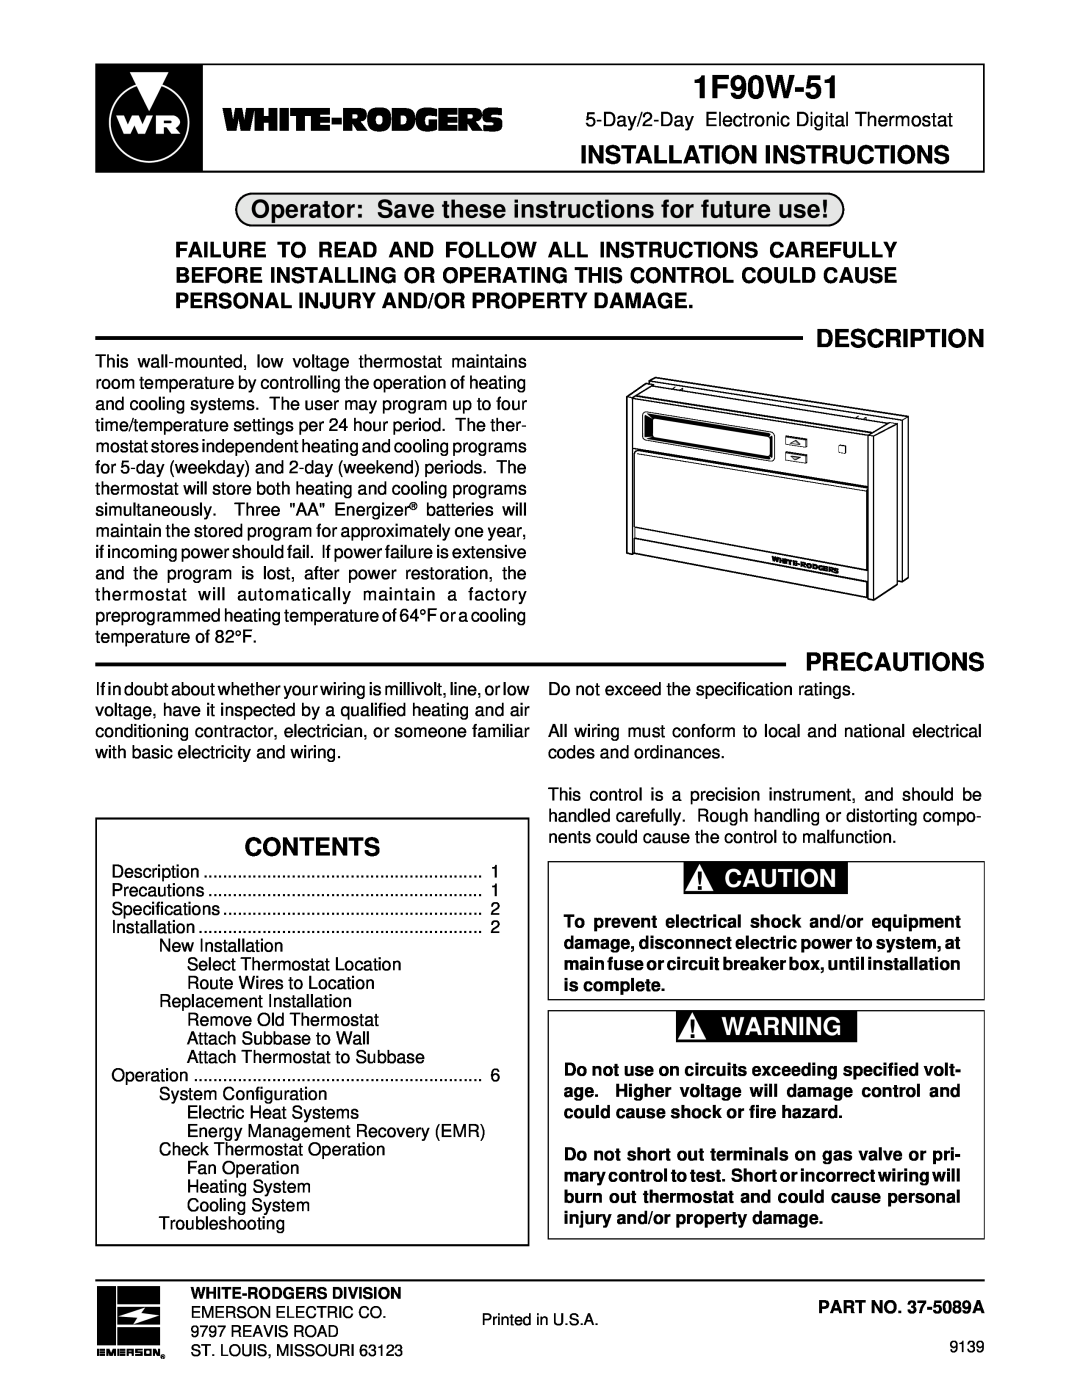 White Rodgers 1F90W-51 manual Operator: Save this booklet for future use, Operation Guide, White-Rodgers 